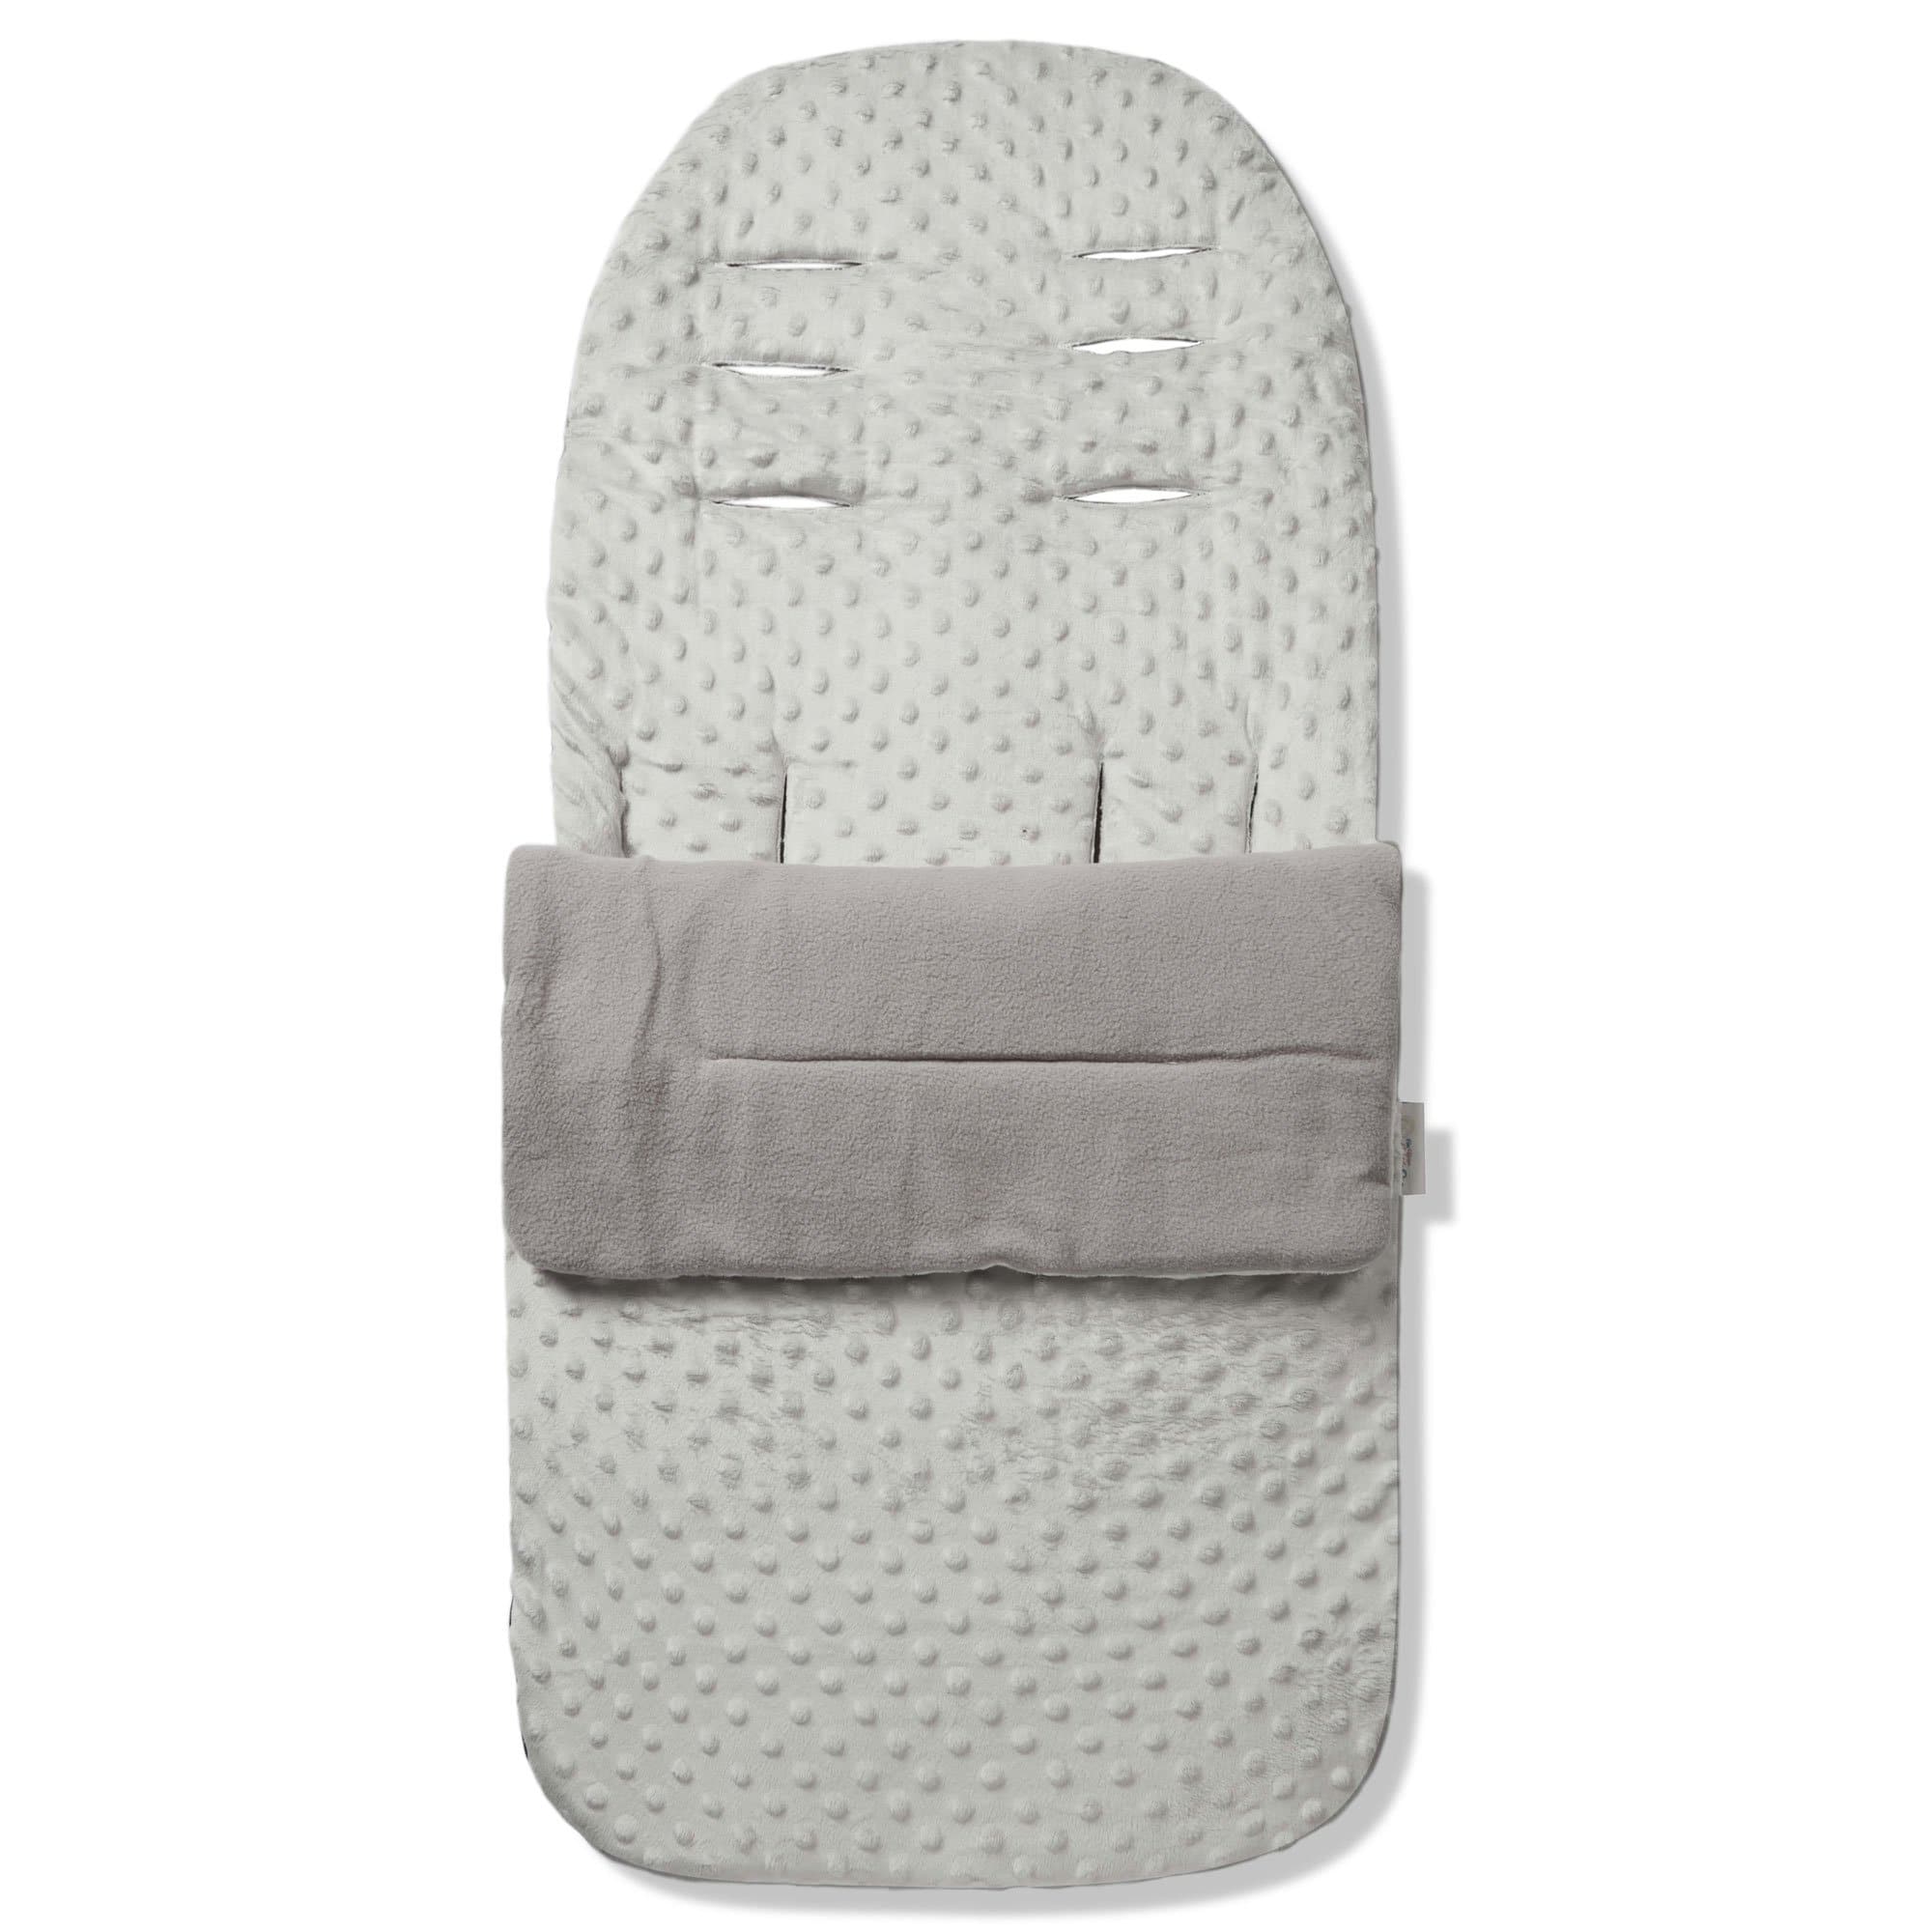 Dimple Footmuff / Cosy Toes Compatible with Combi - Grey / Fits All Models | For Your Little One